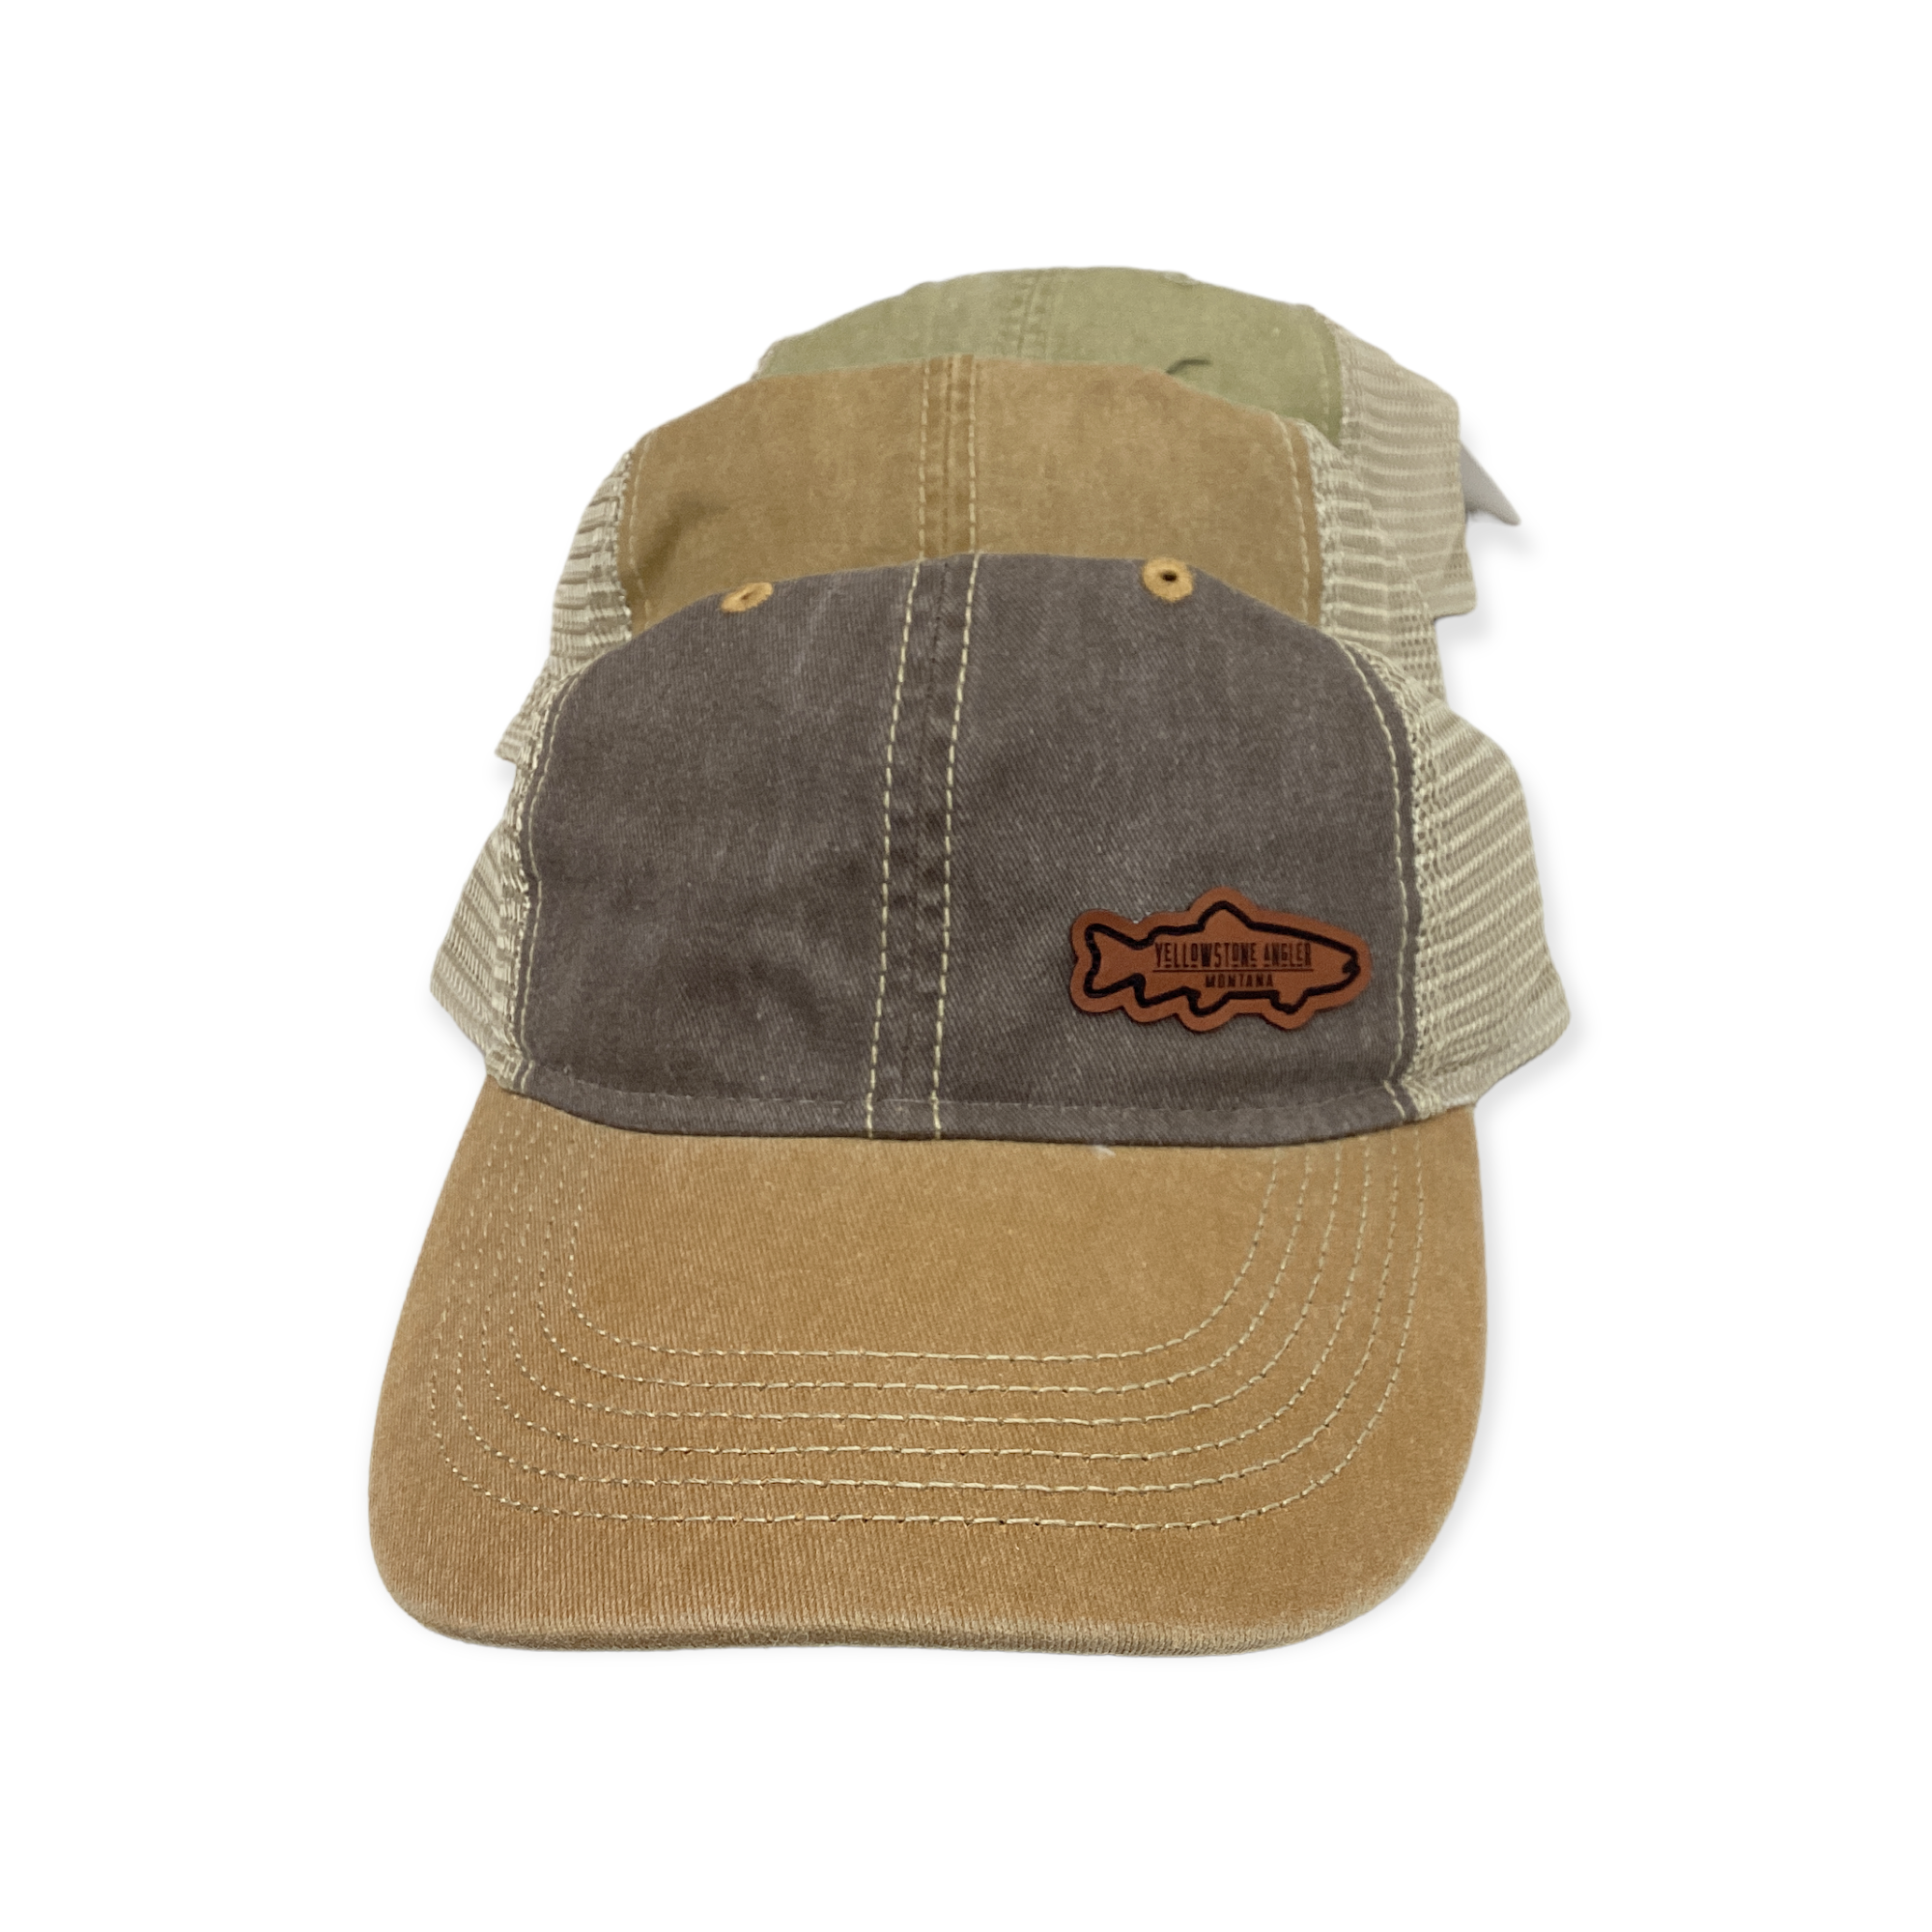 Yellowstone Angler Leather Trout Patch Trucker Hat